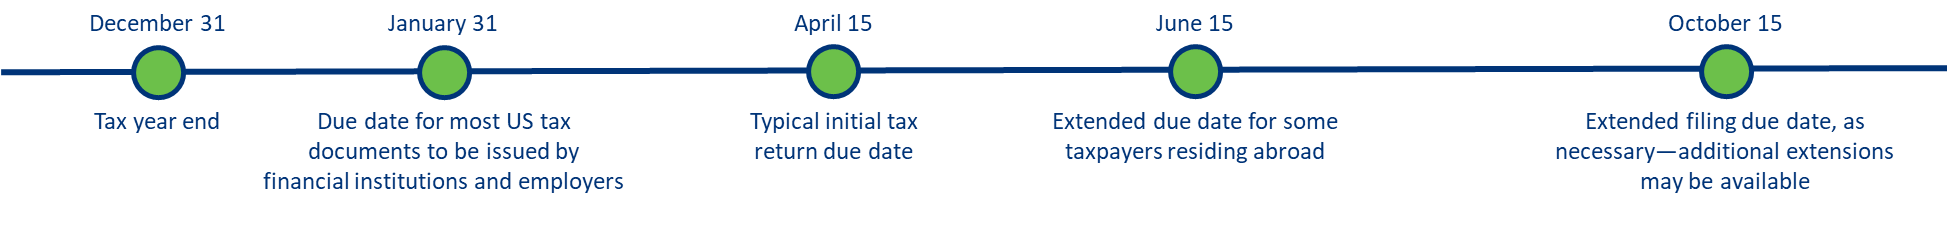 Tax at a Glance Timeline 1